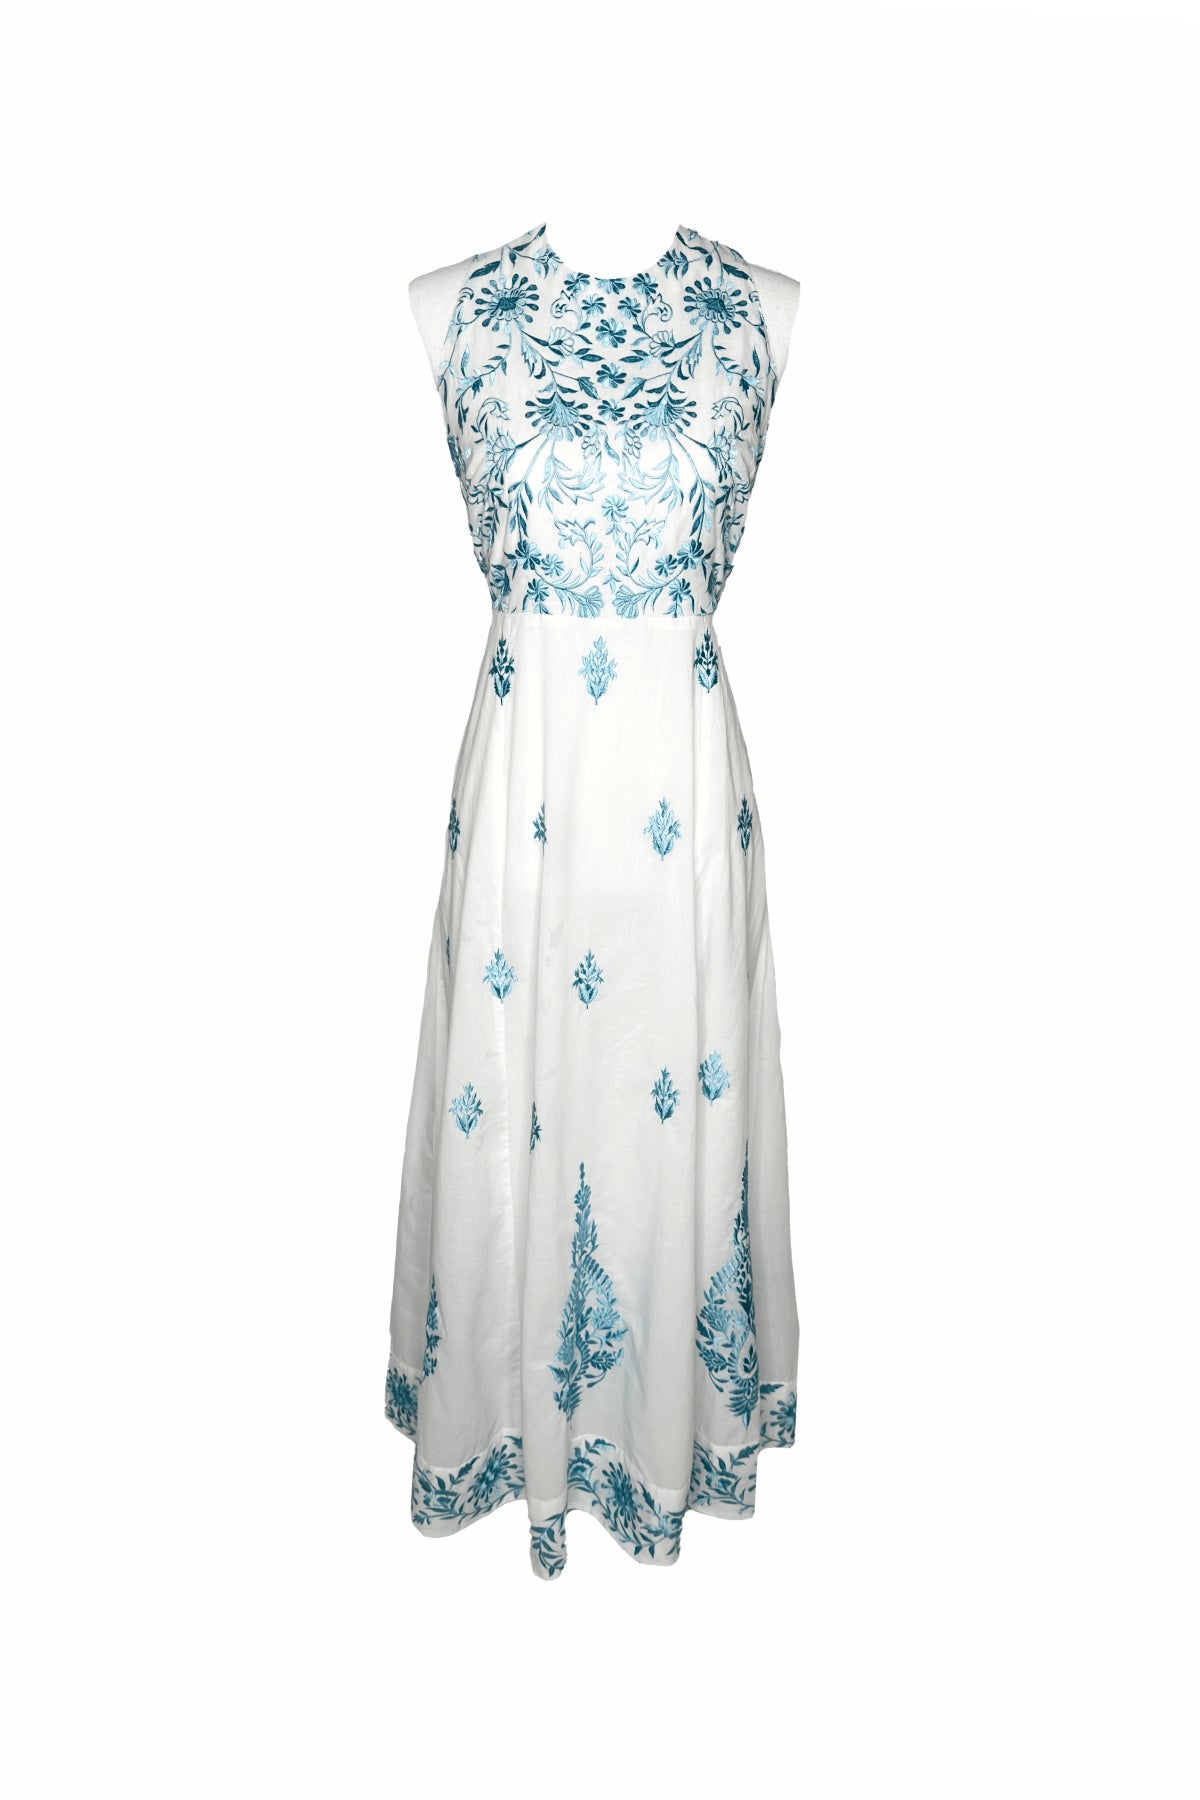 Halter Maxi Sundress in Ciel & White Embroidered Sultan Floral